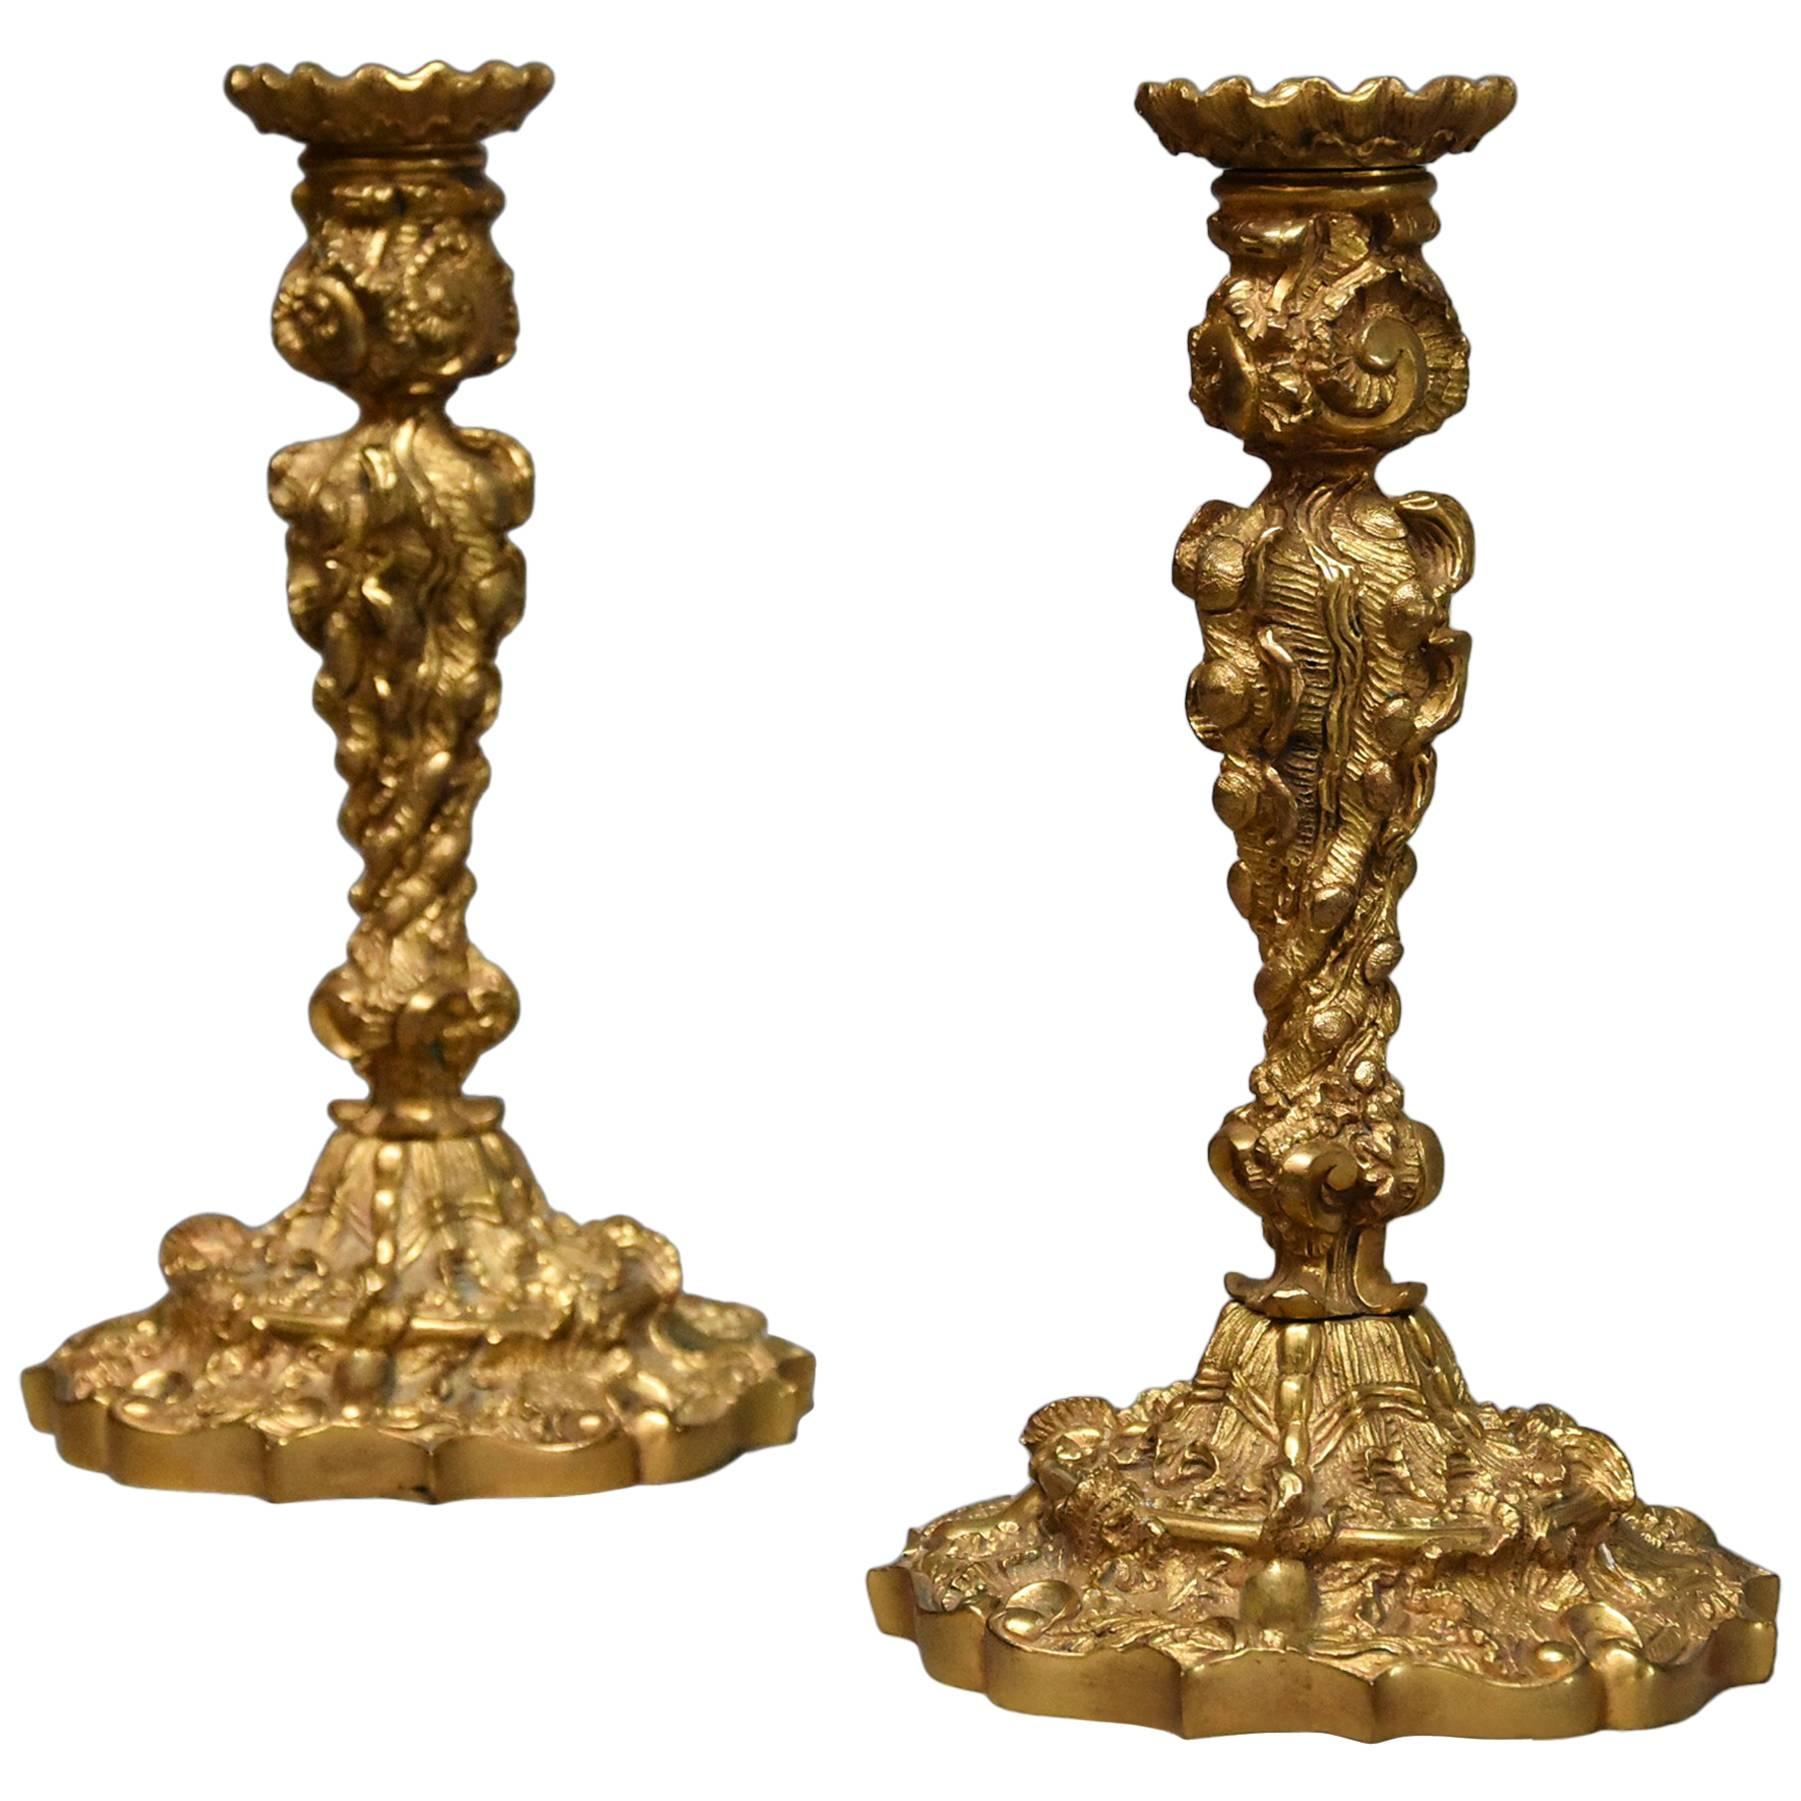 Pair of 19th Century French Ormolu Candlesticks in the Rococo Style